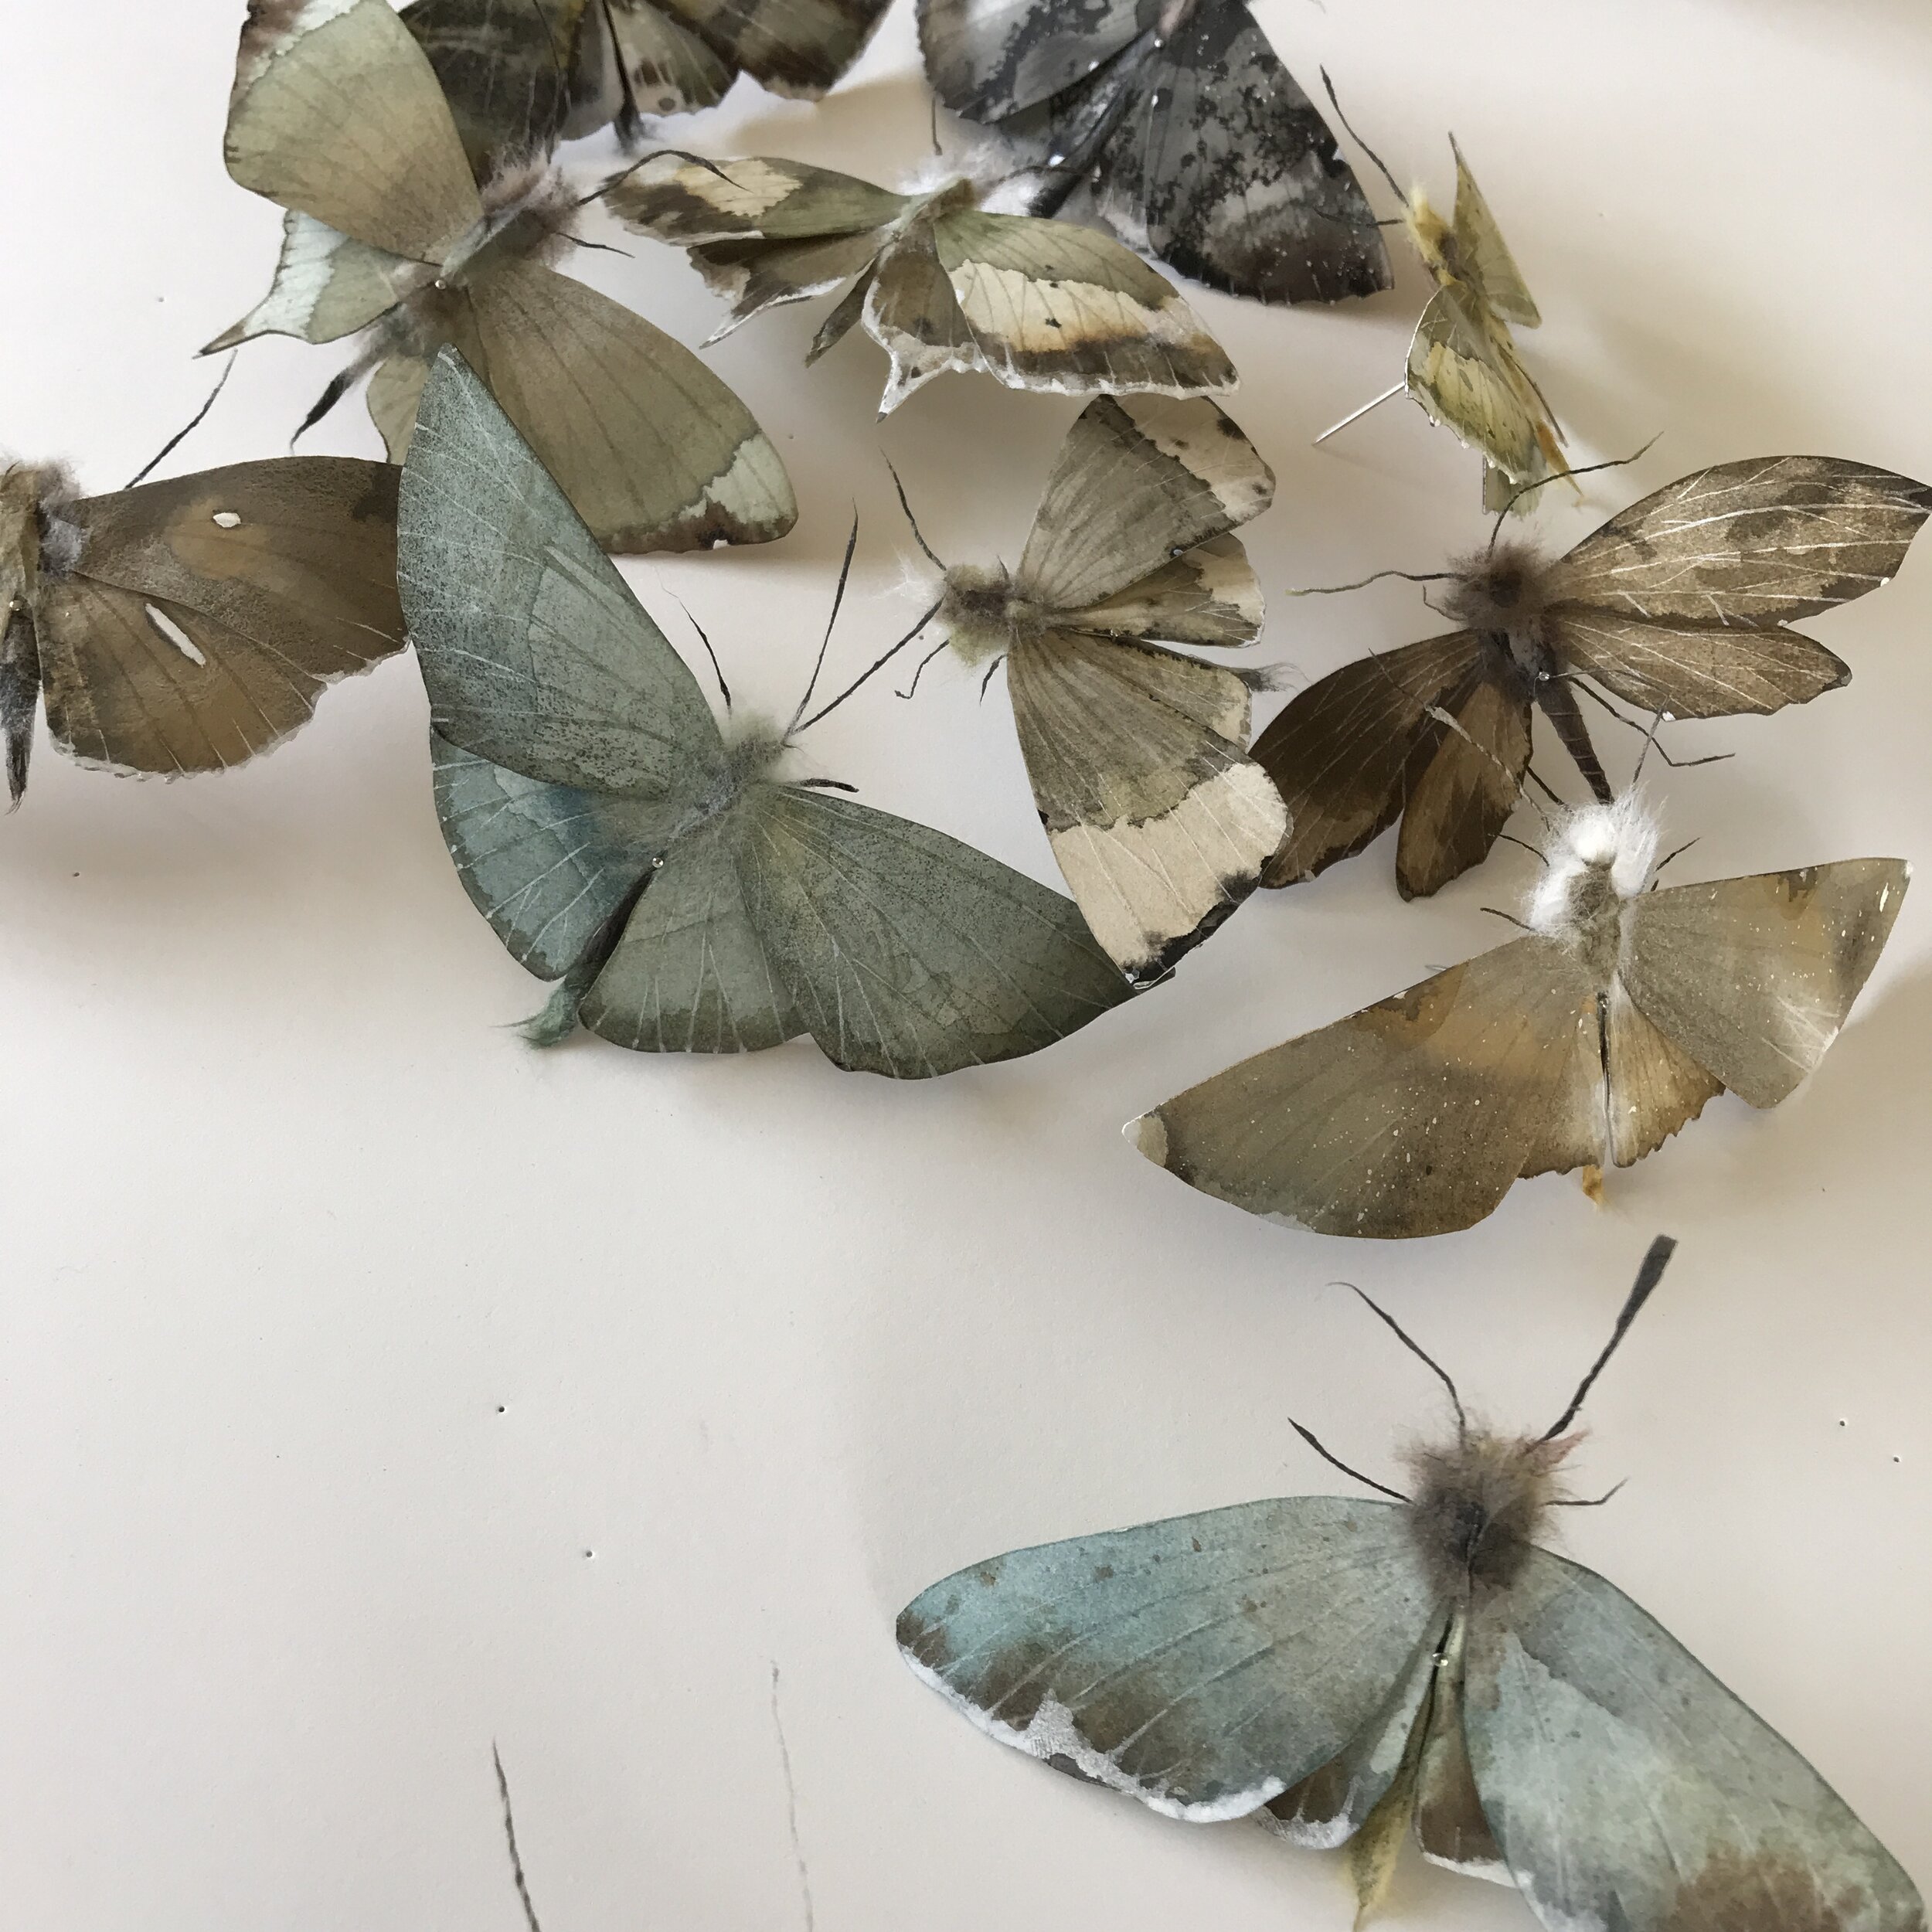 Lesley Kendall , Moths created with Paper, lfe size, 2019.JPG